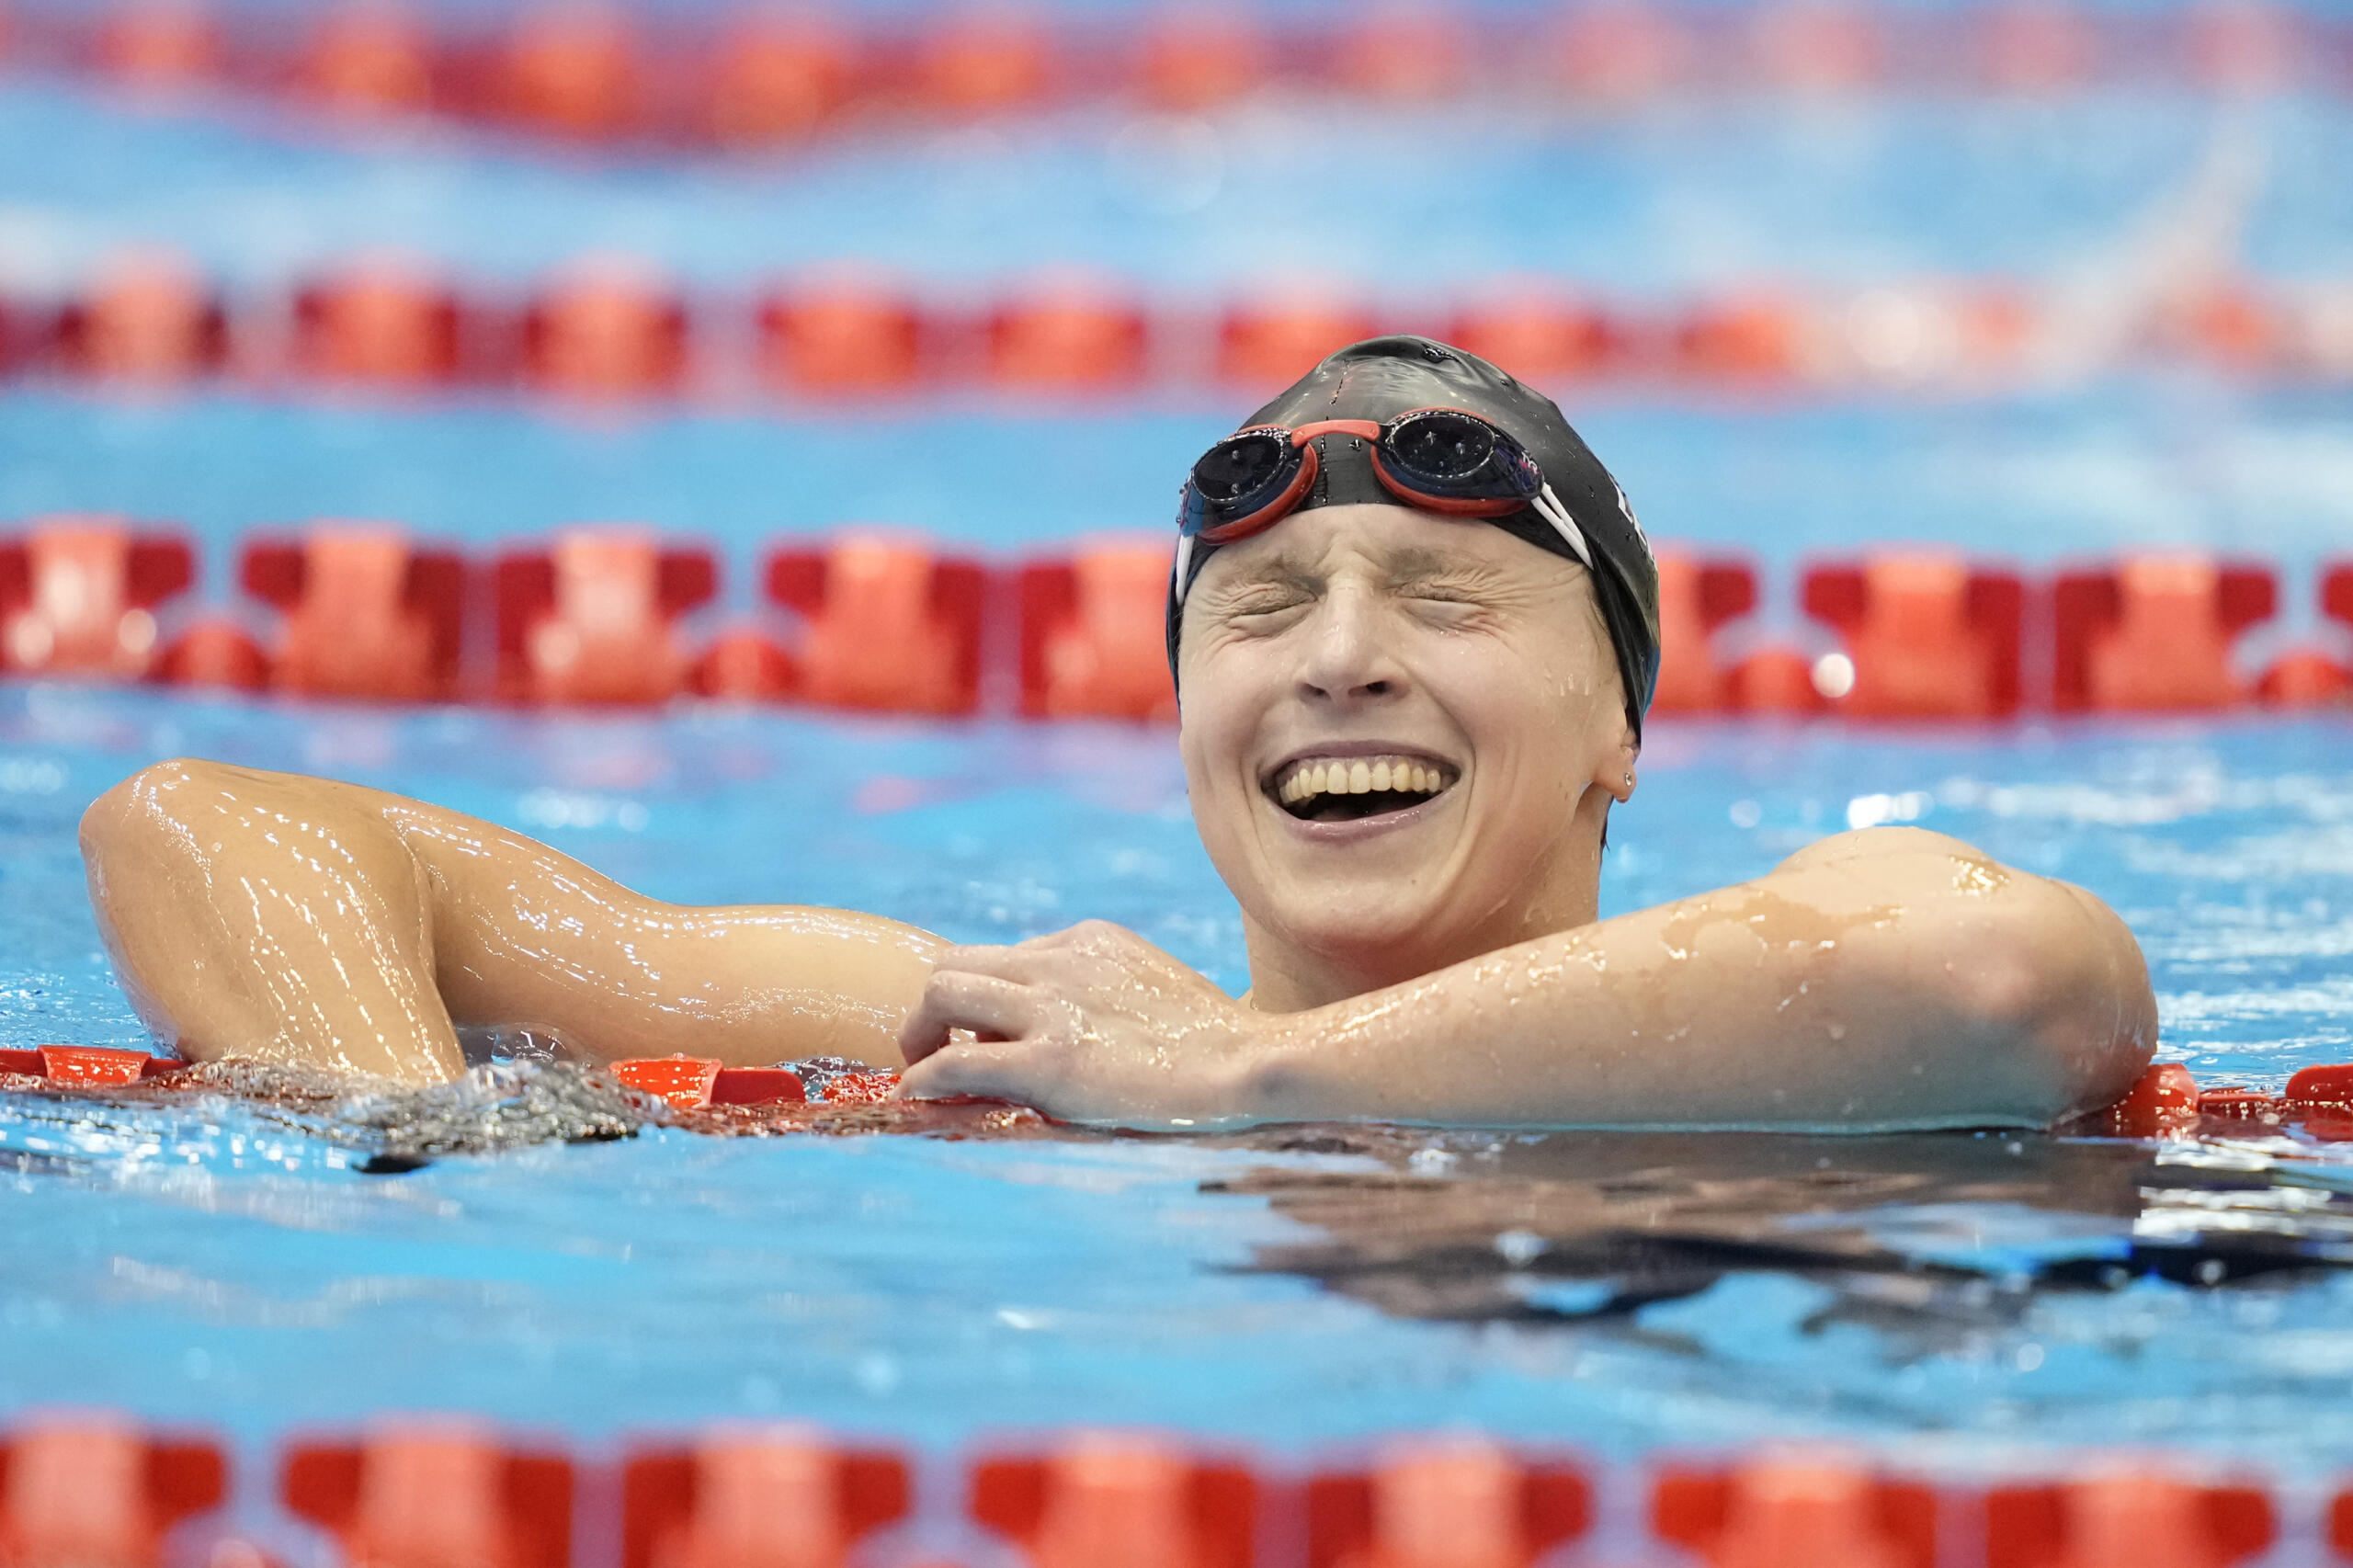 Katie Ledecky of the U.S. celebrates after winning the women's 800m freestyle final at the World Swimming Championships in Fukuoka, Japan, Saturday, July 29, 2023.